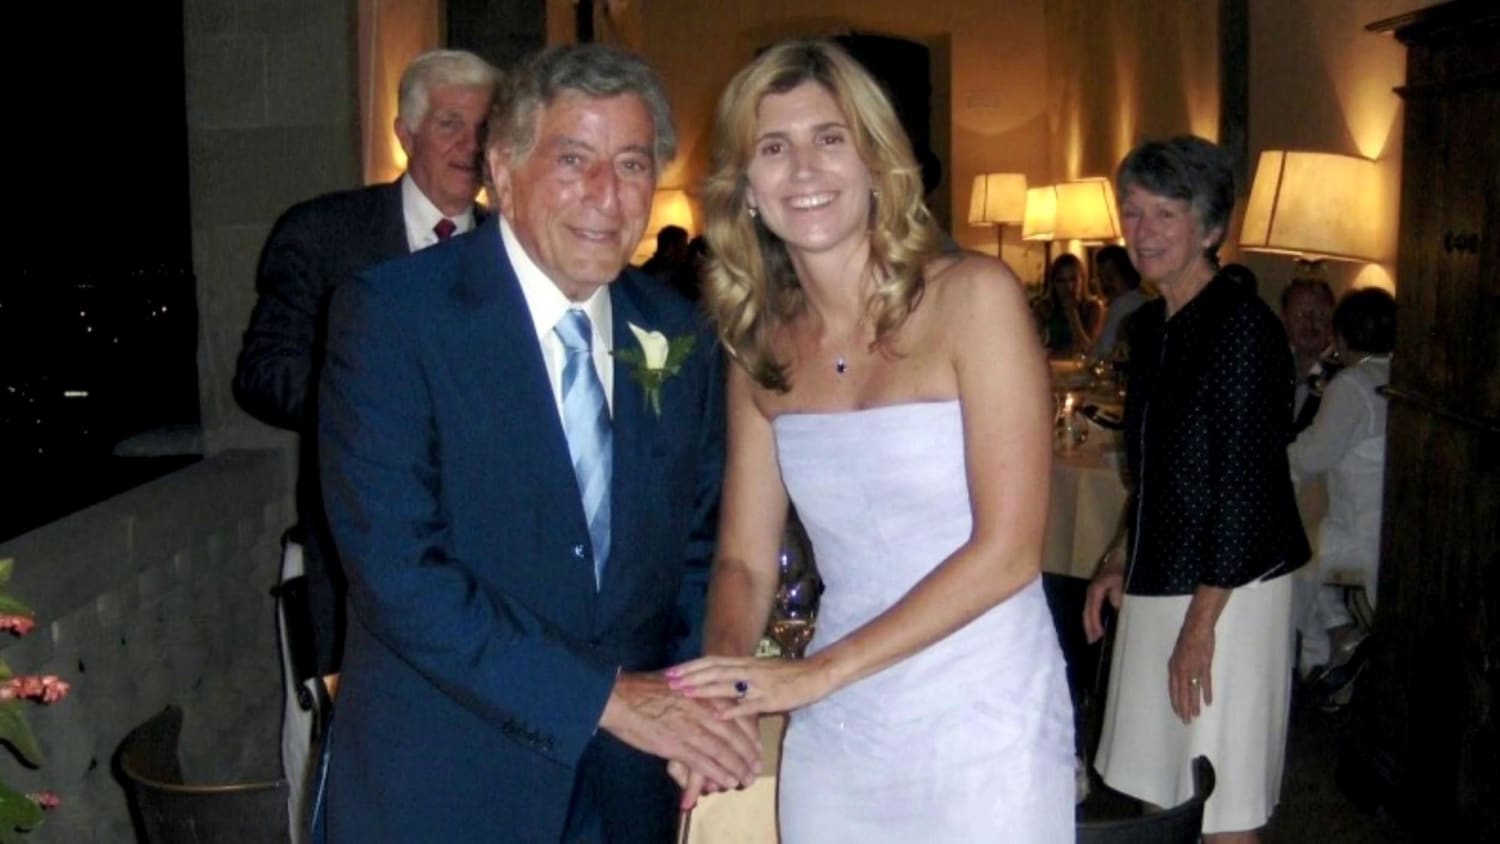 Tony Bennett's Wife Susan Benedetto Recalls Their Love Story